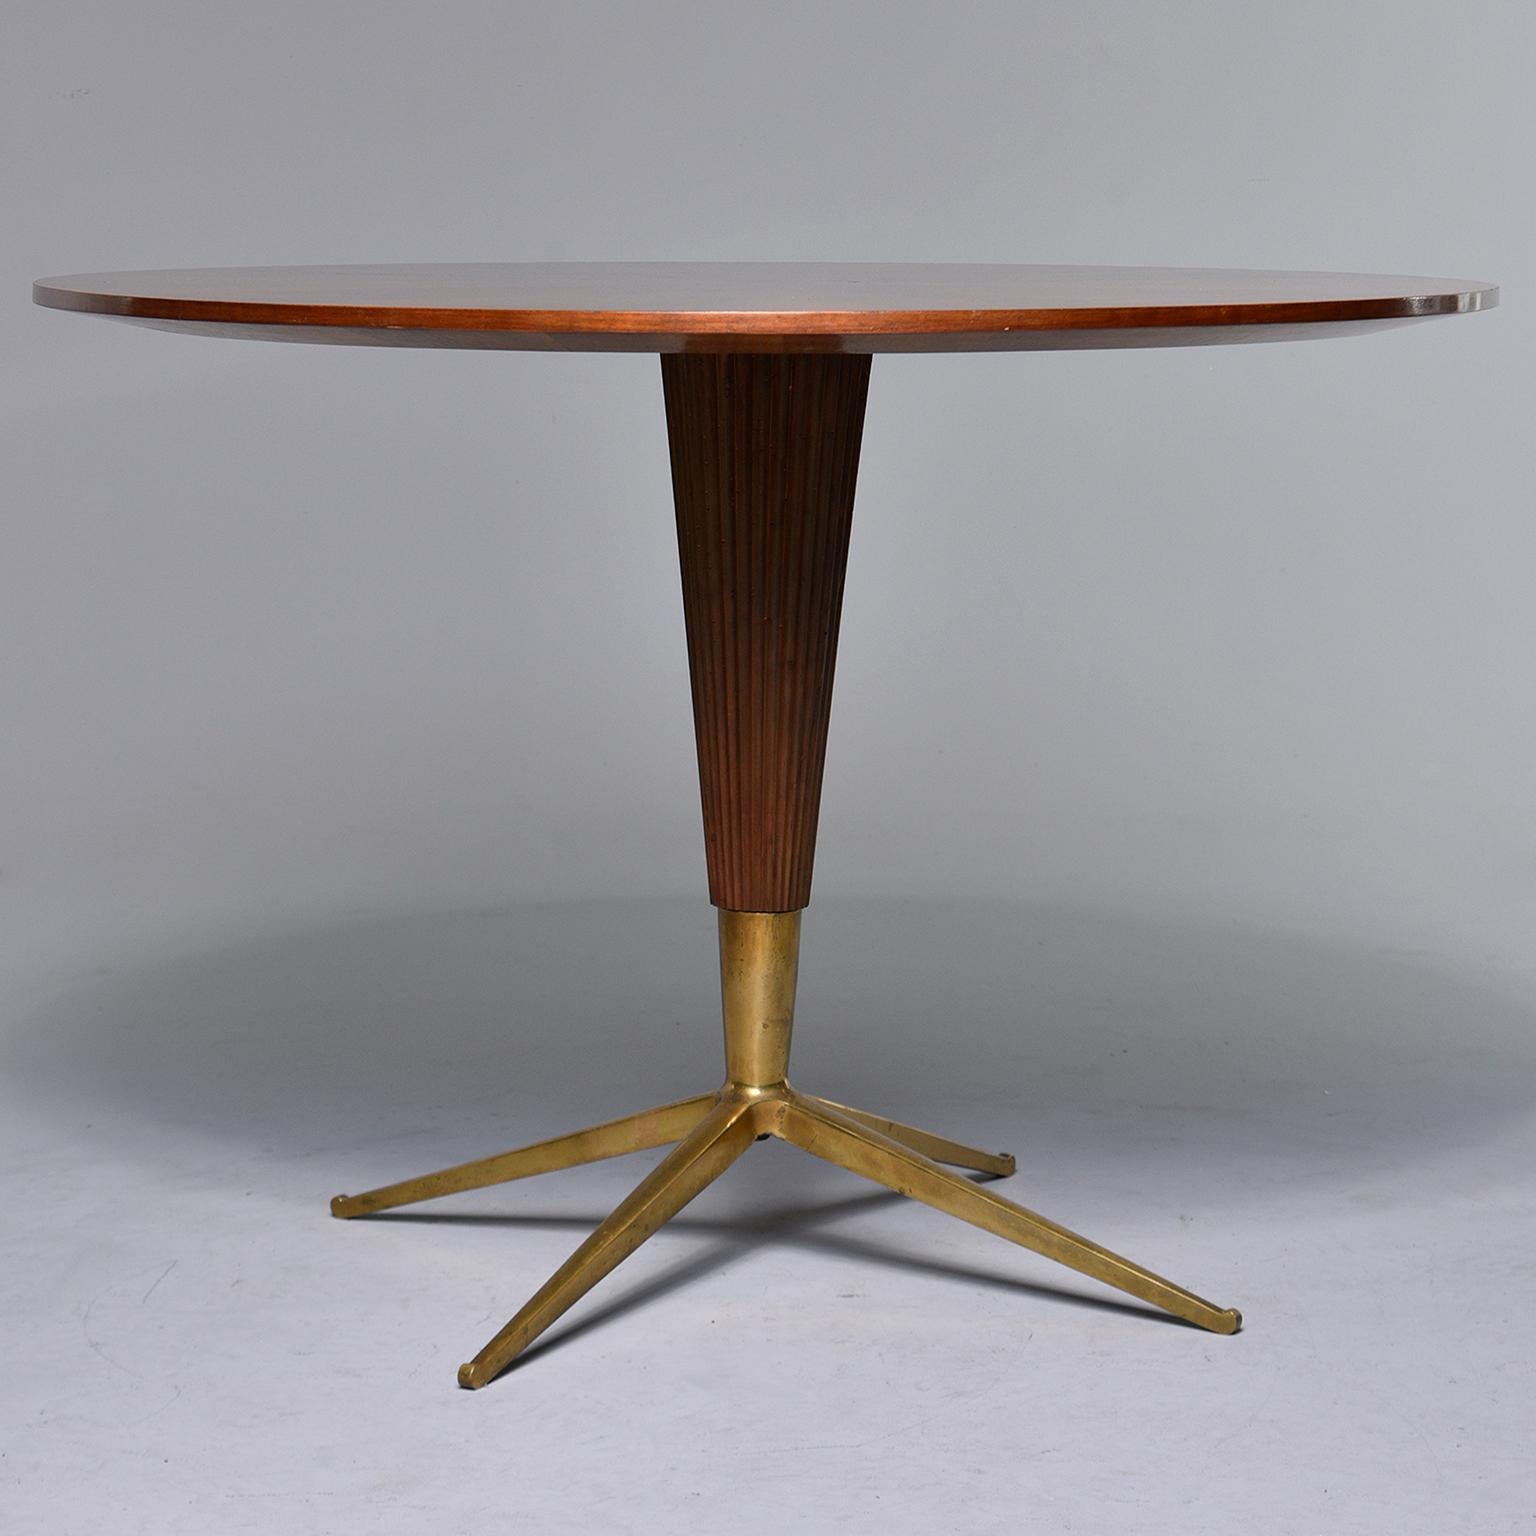 Round Italian table can be used as a center table, breakfast table or game table, circa 1960s. Top features a starburst pattern of what appears to be walnut veneer. Tapered and ridged center support column ends in four legged brass base. Unknown